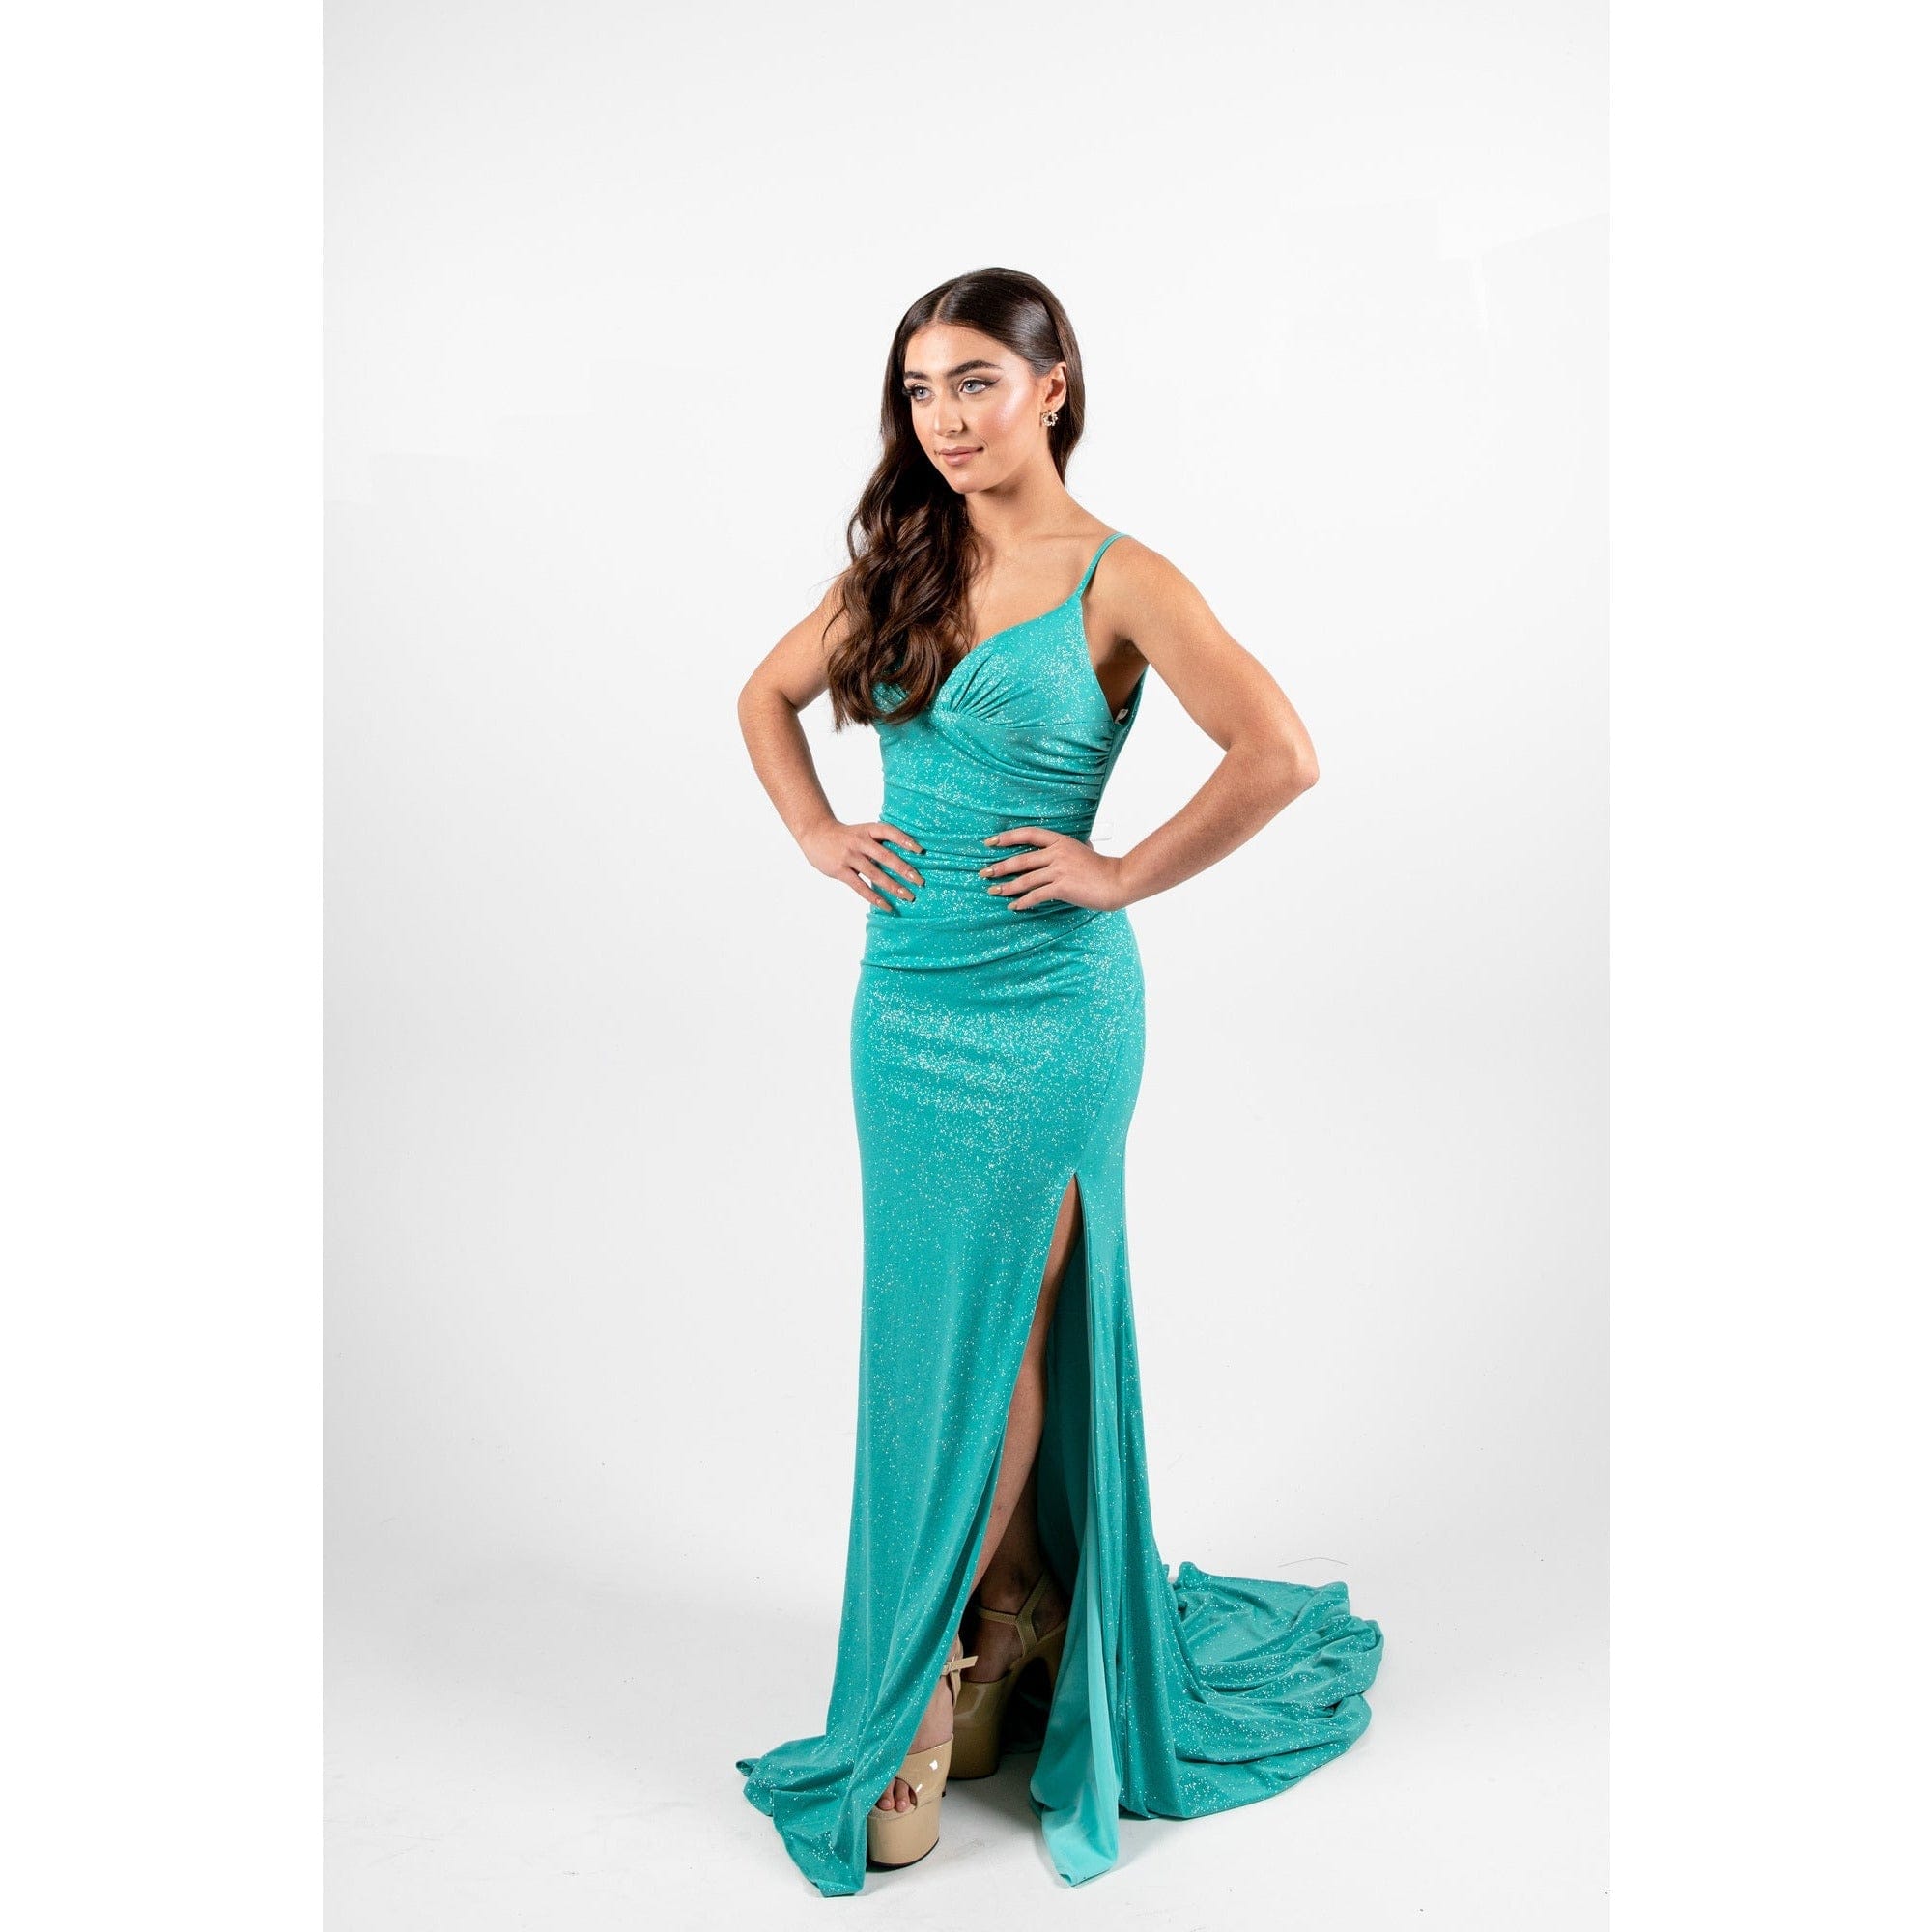 Image of  Candy Prom 04-50033 | Prom dress, evening dress